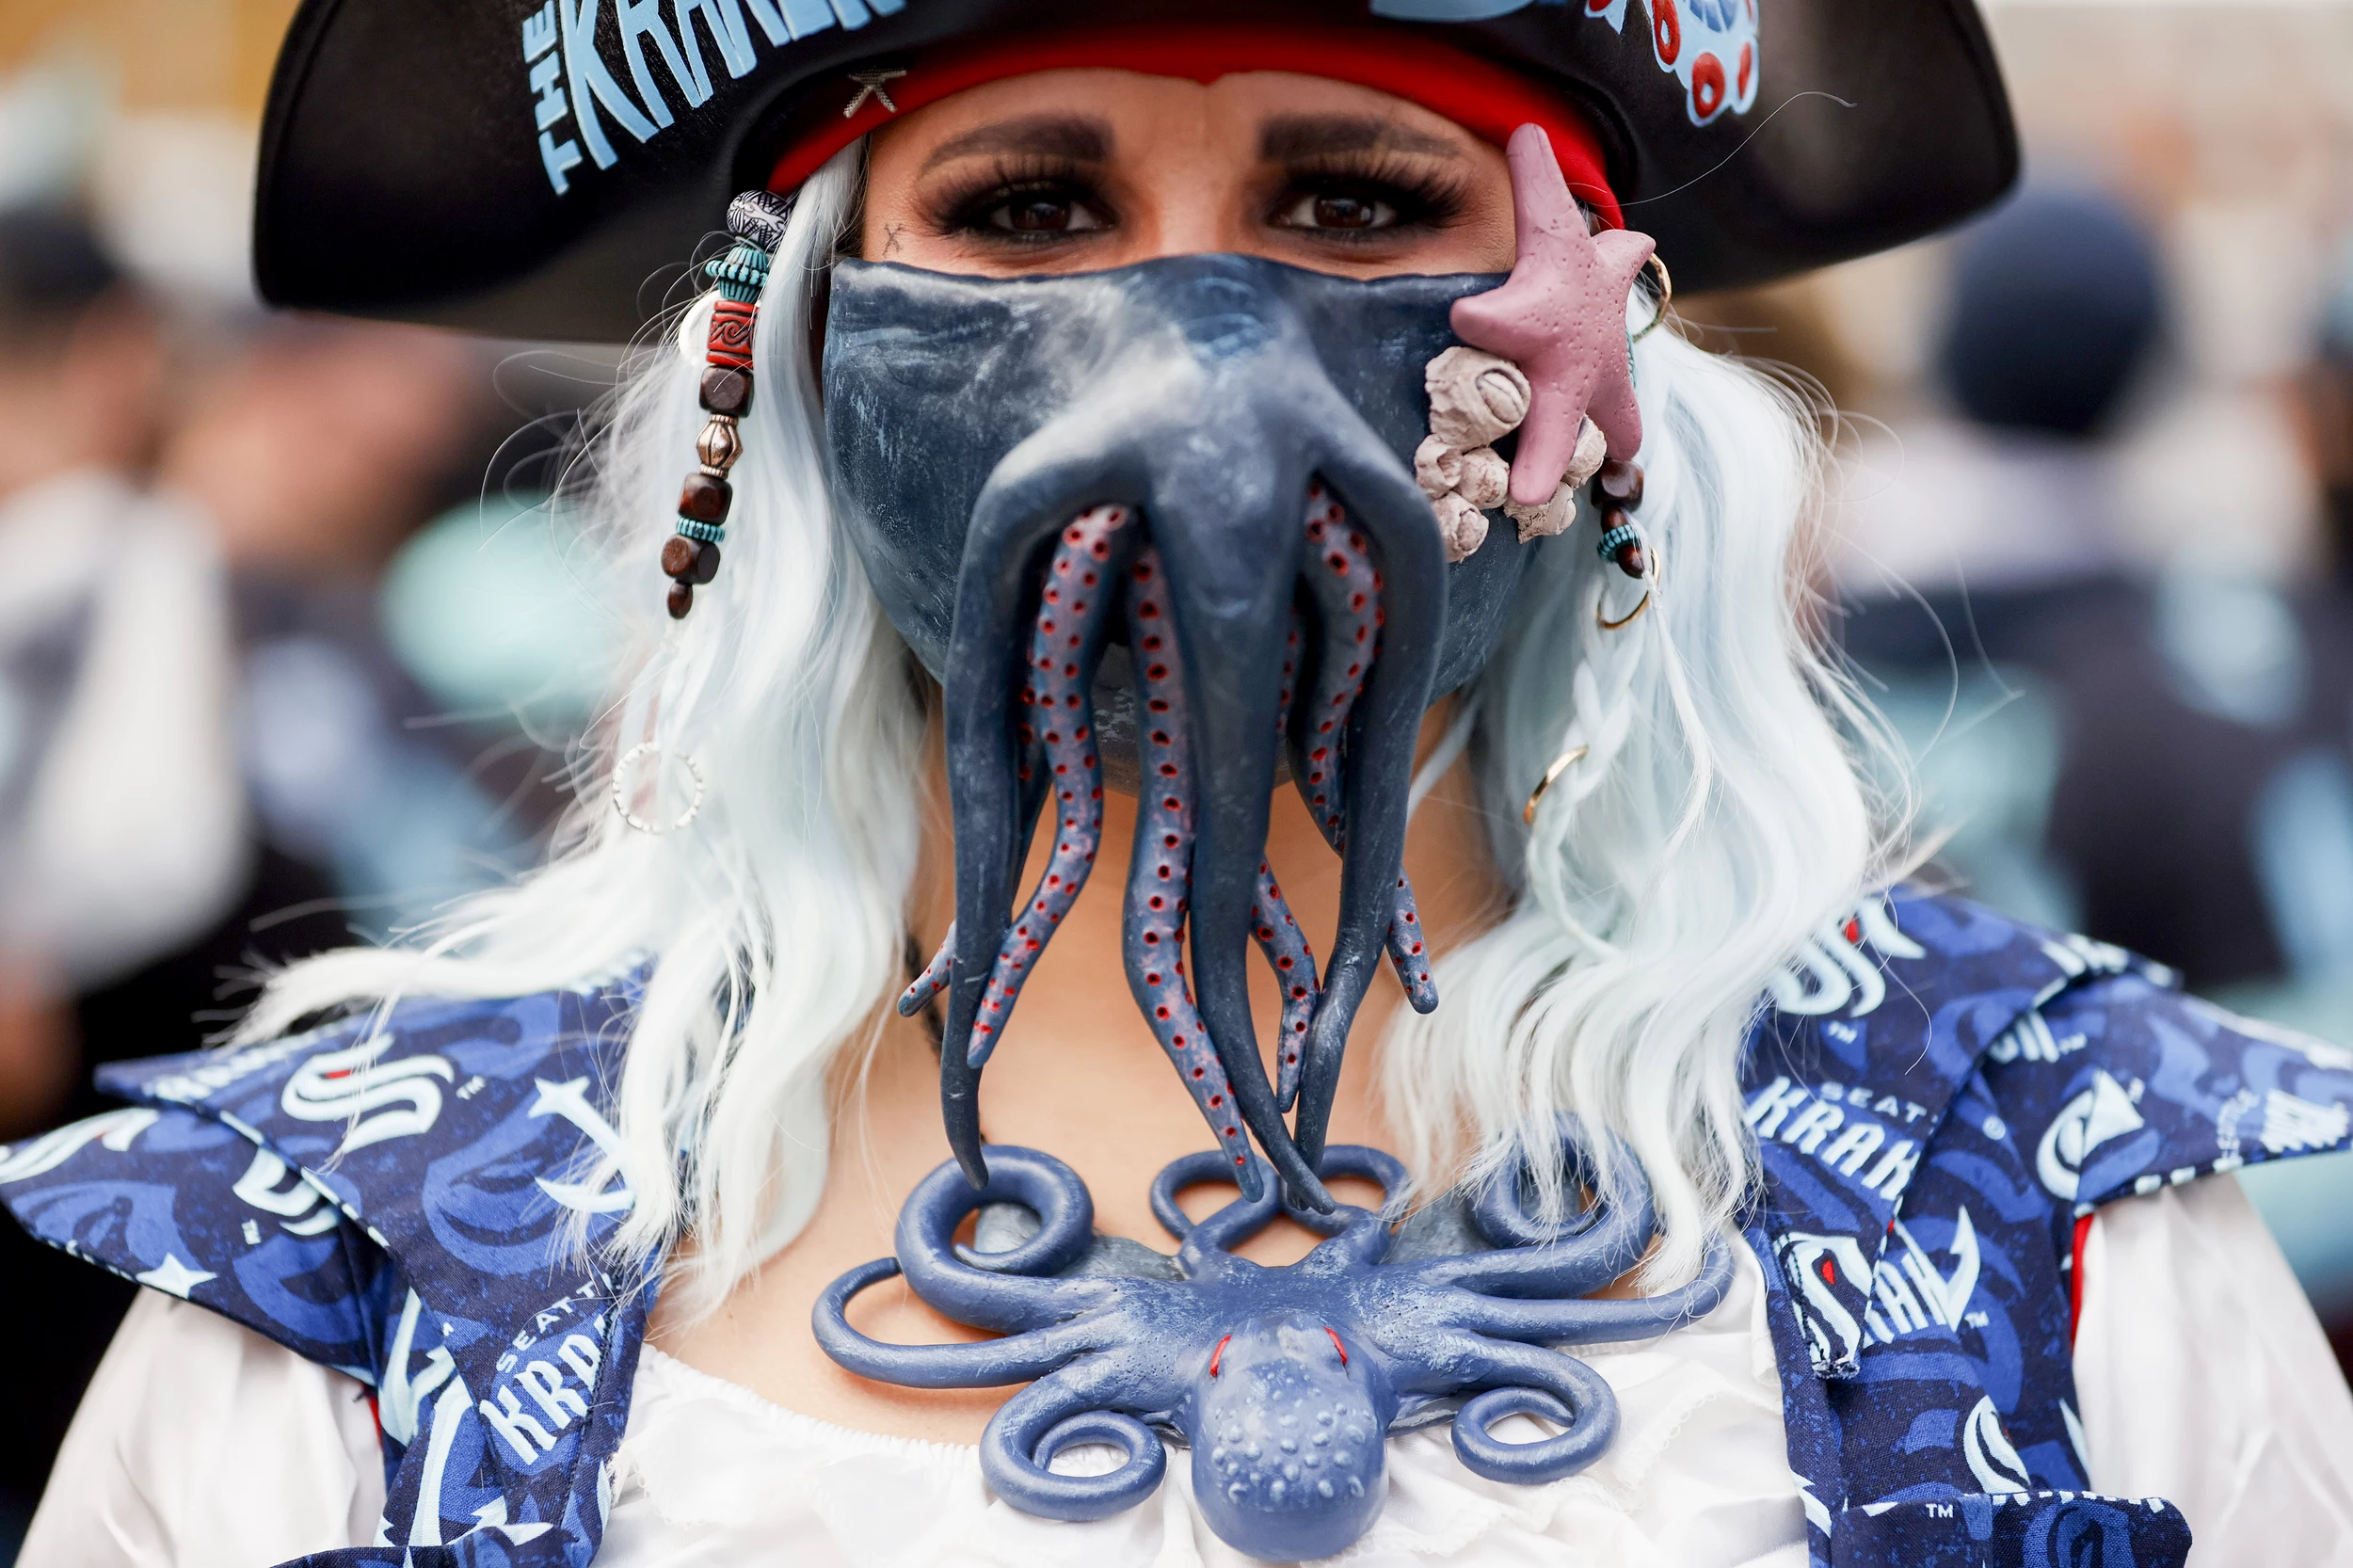 Seattle Kraken unveils new mascot inspired by the Fremont Troll